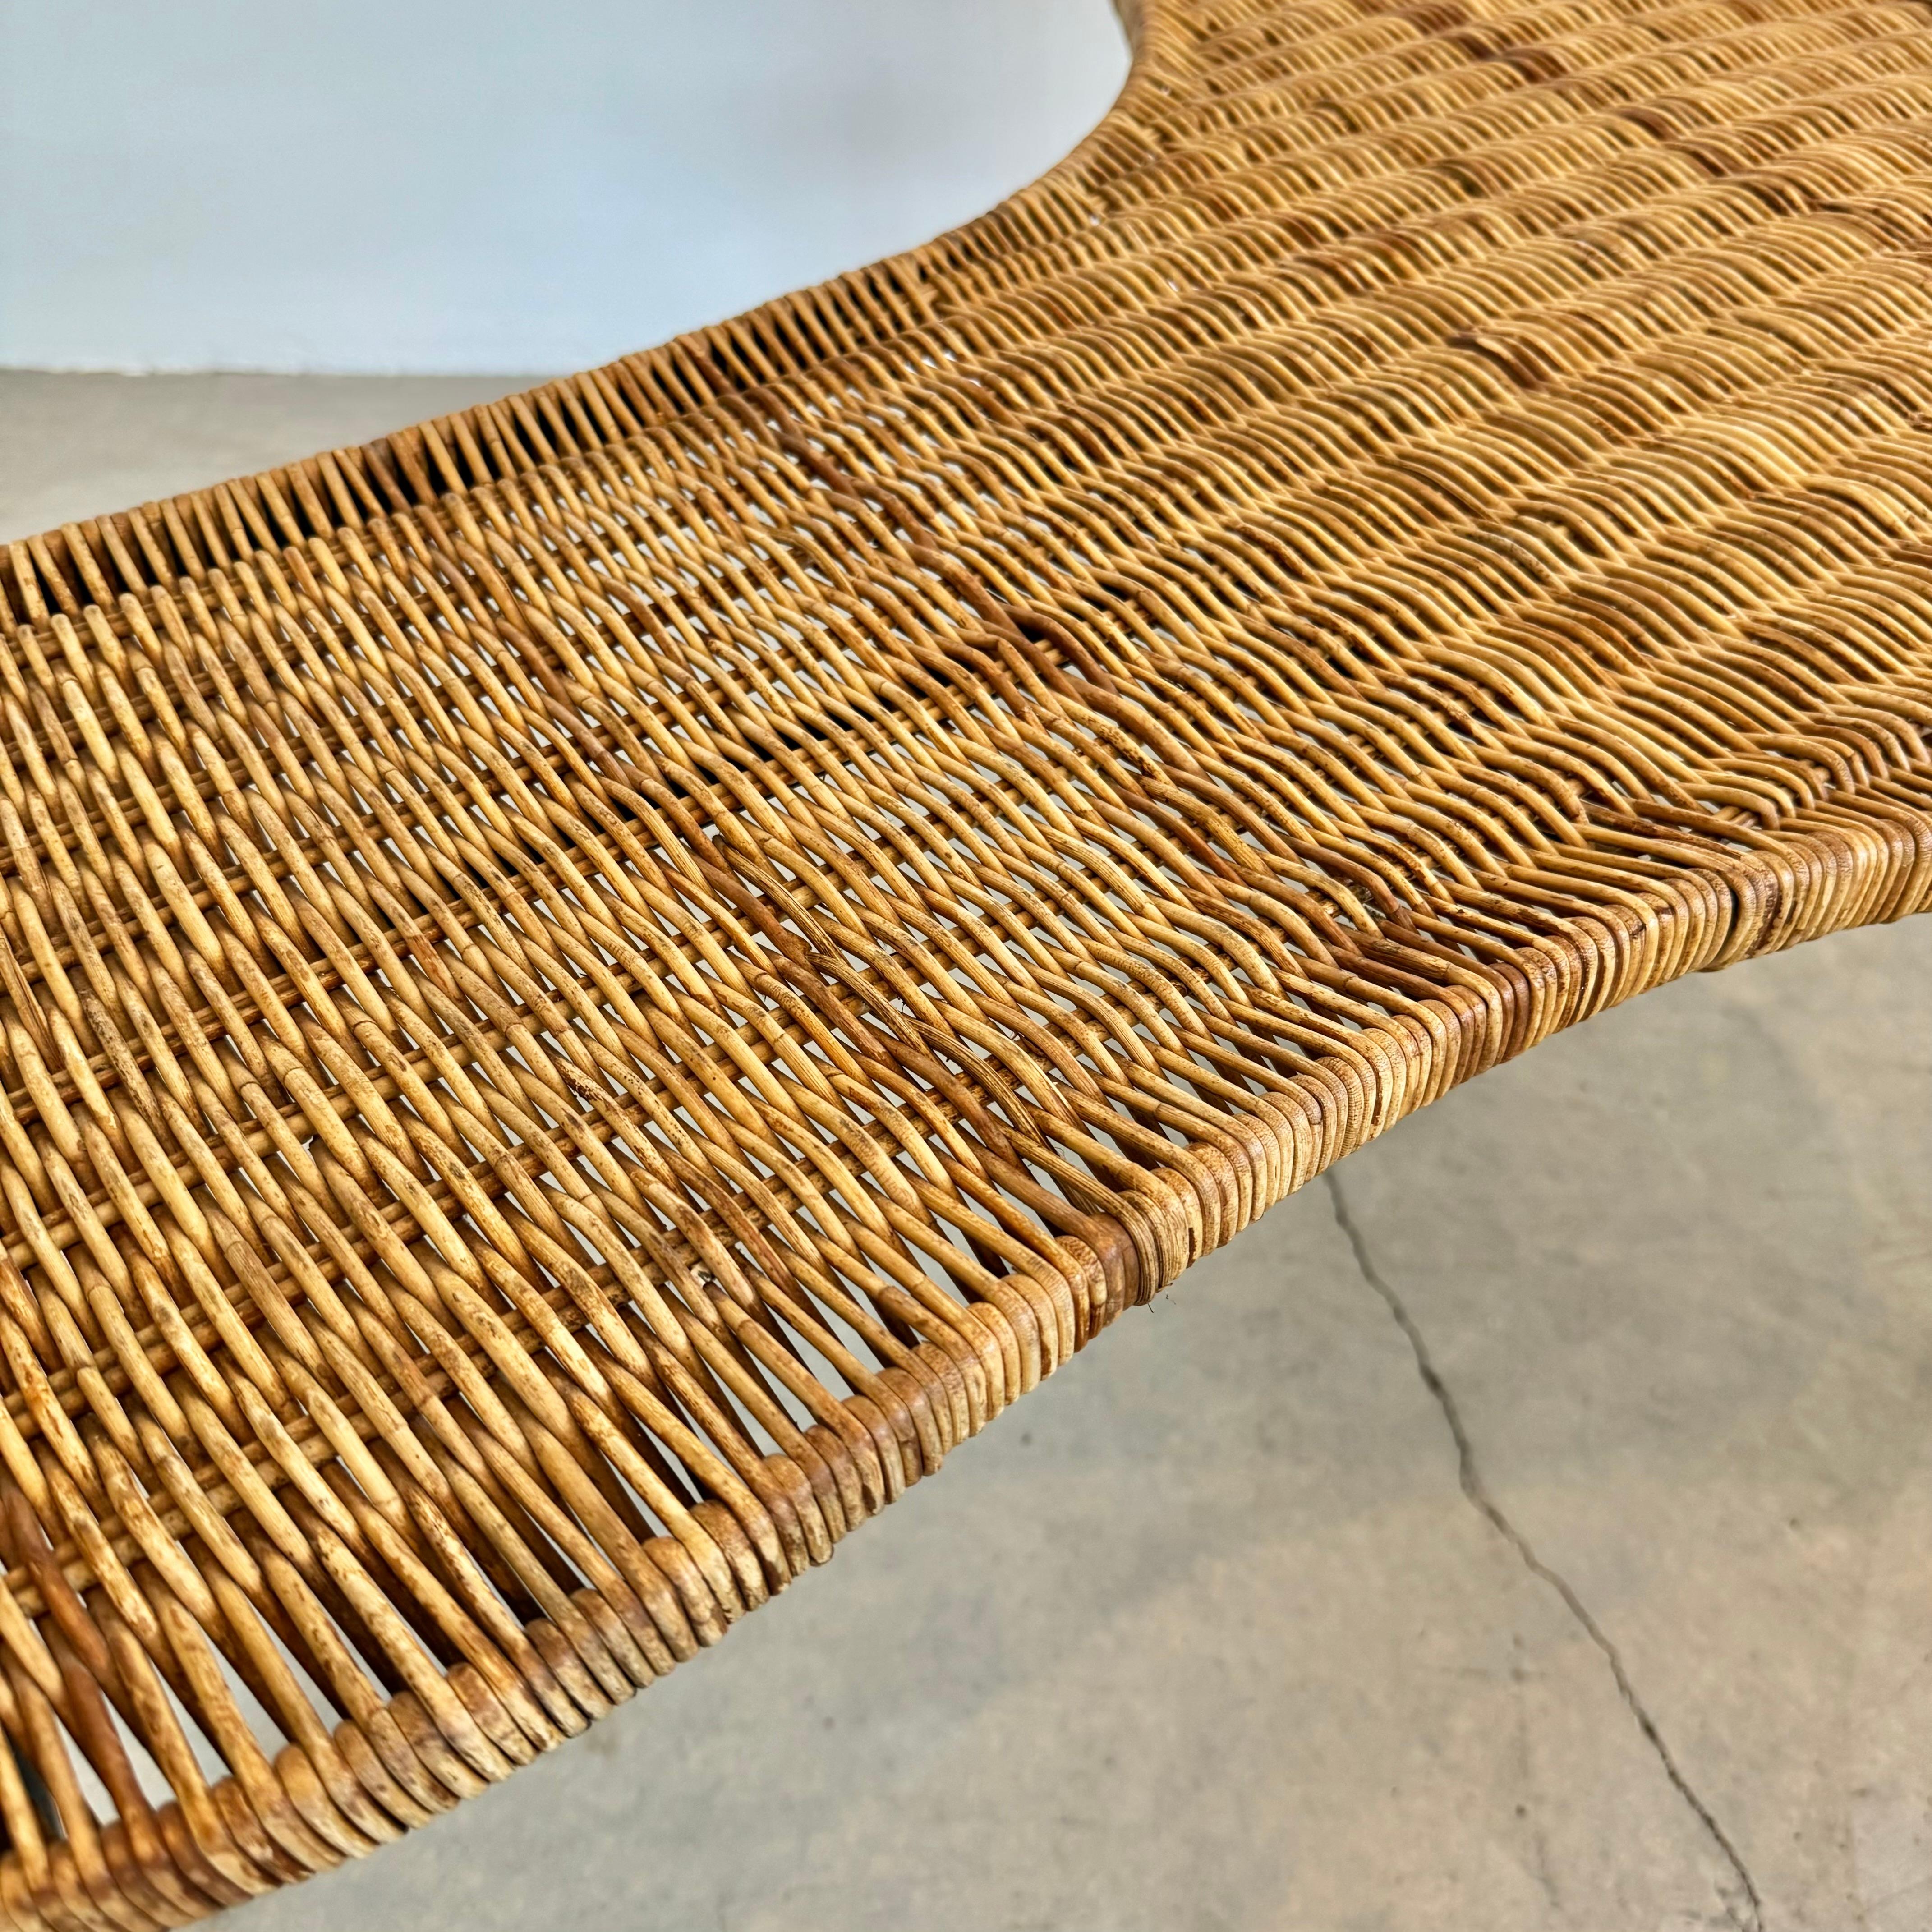 Biomorphic Wicker and Iron Coffee Table, 1950s France For Sale 4